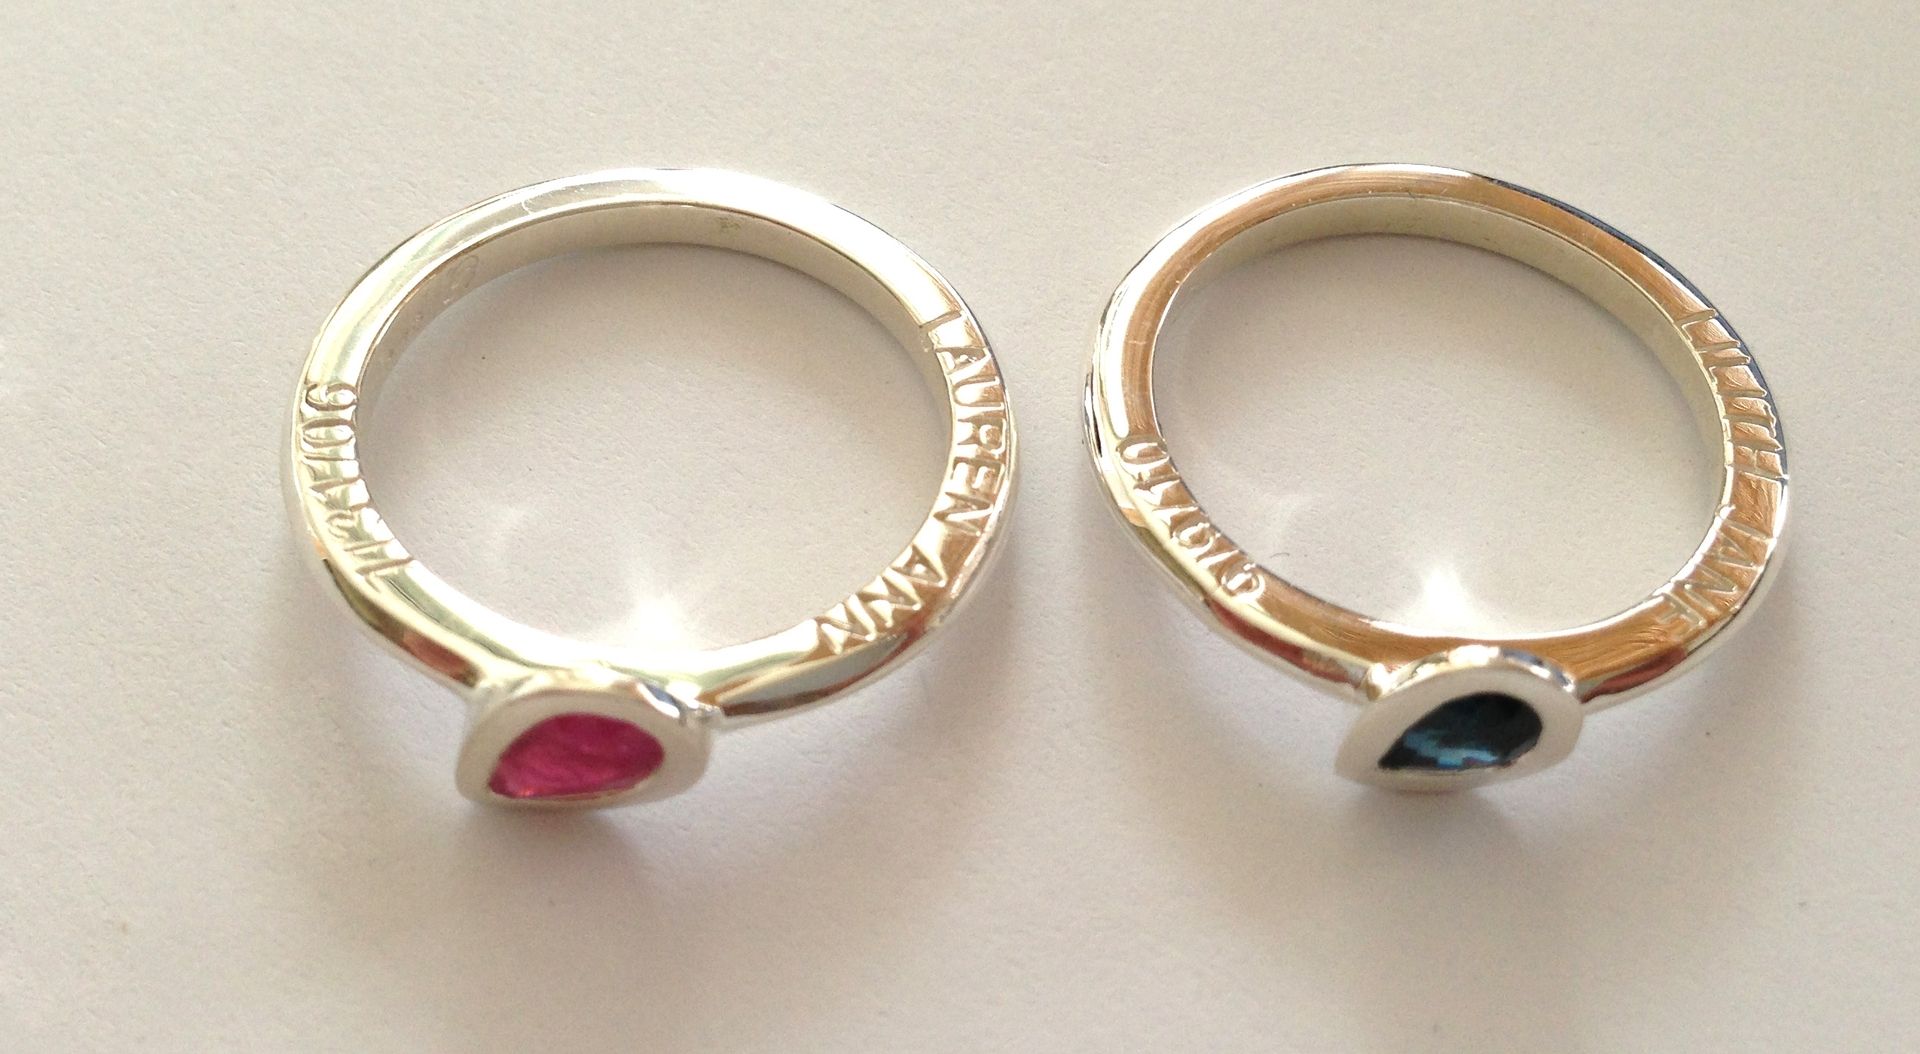 Hand Crafted Mother Daughter Rings by Chris & Alix Jewelry Inc